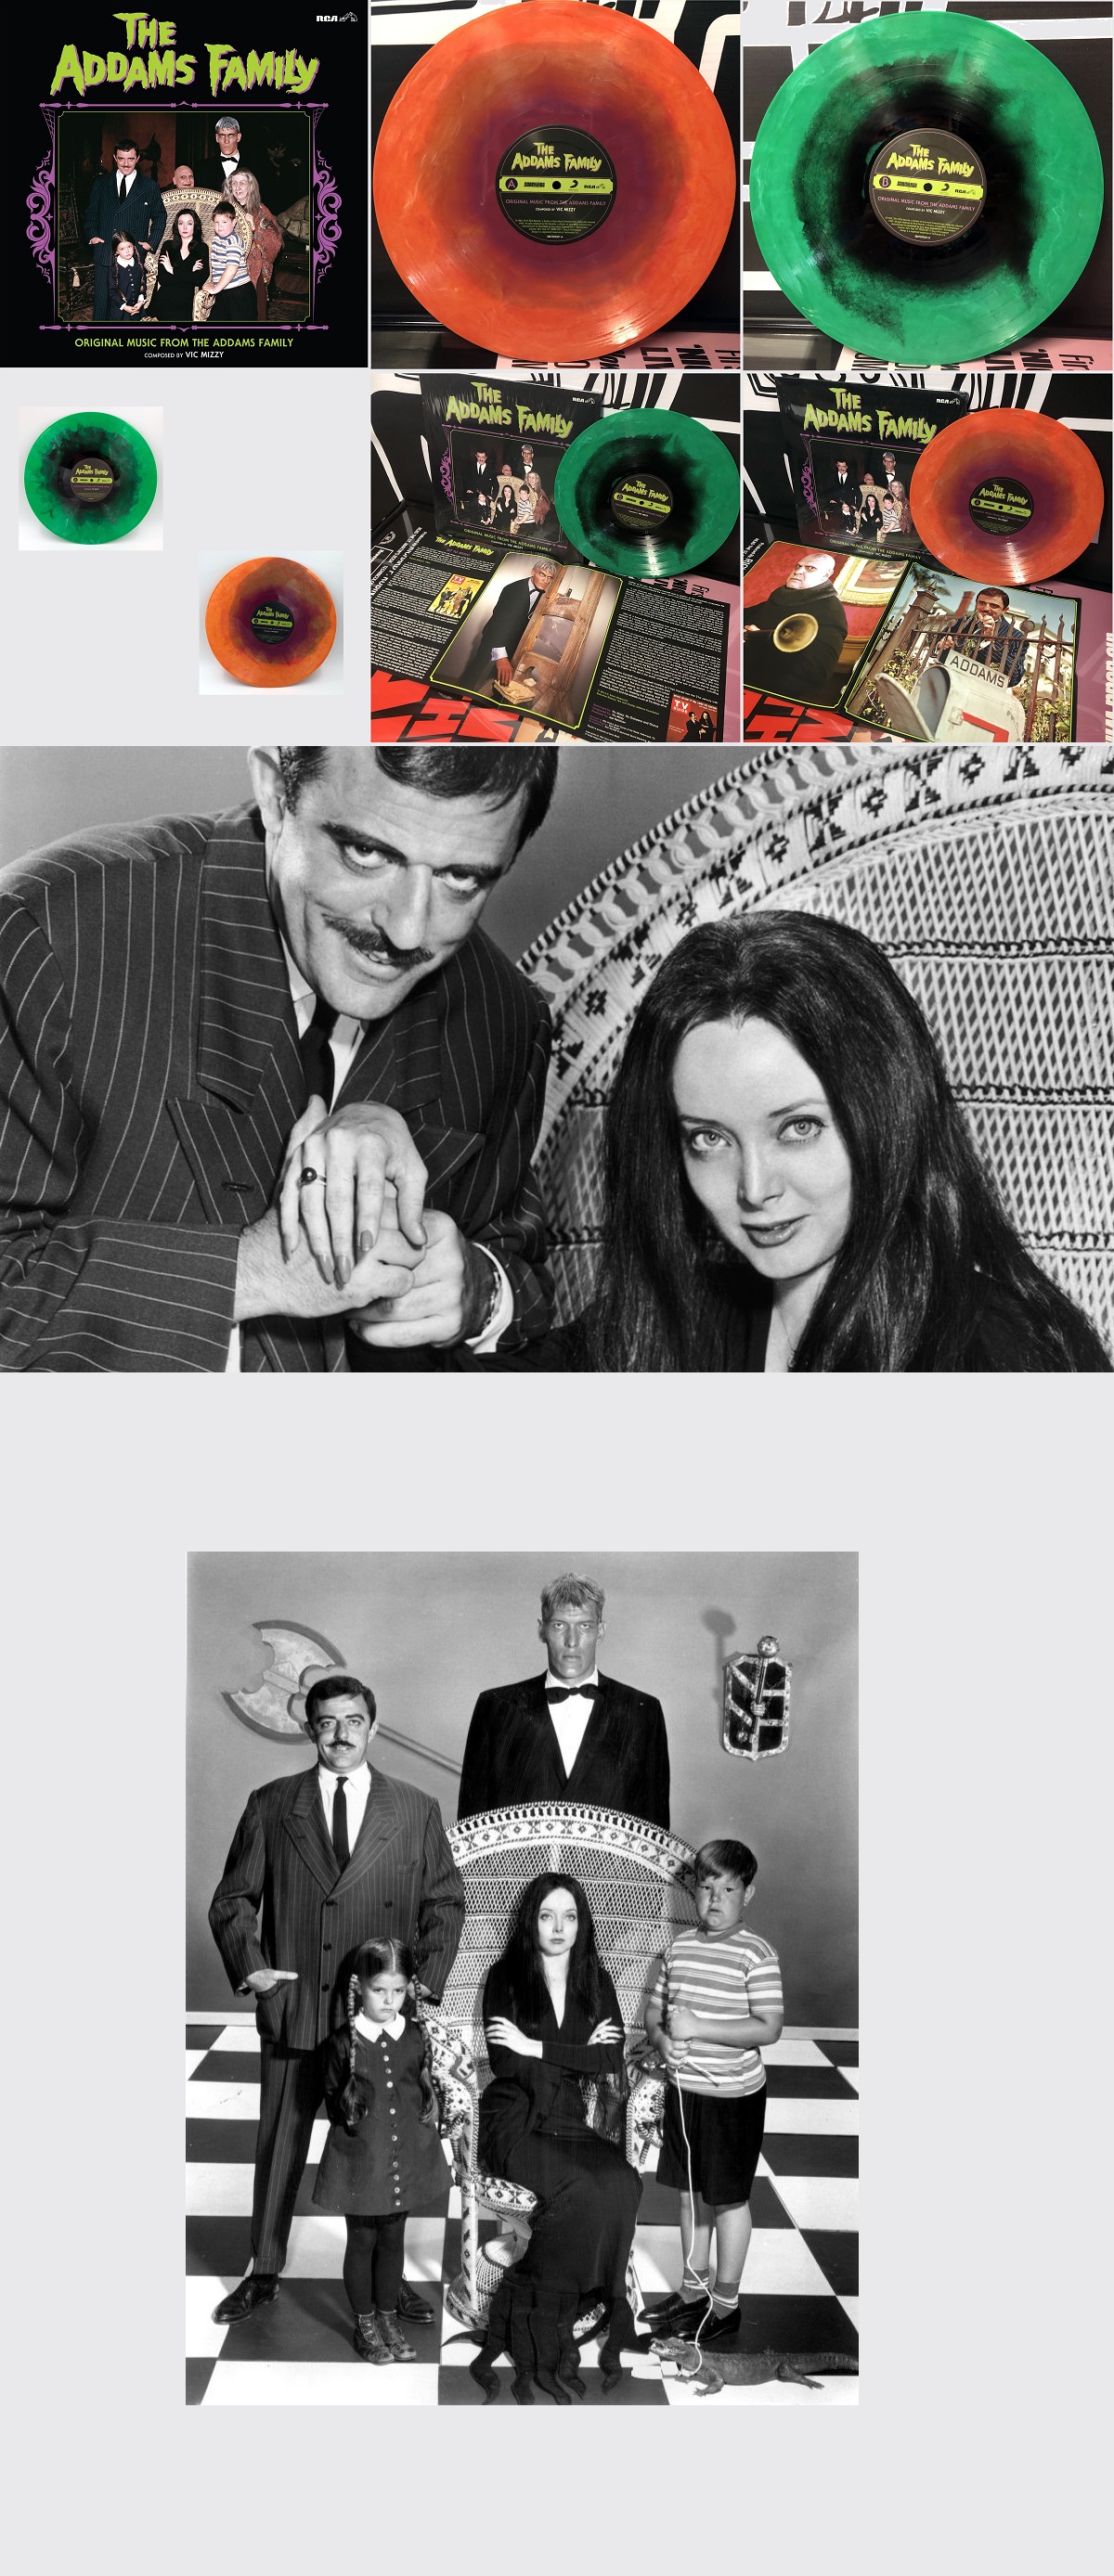 The Addams Family 55th anniversary 